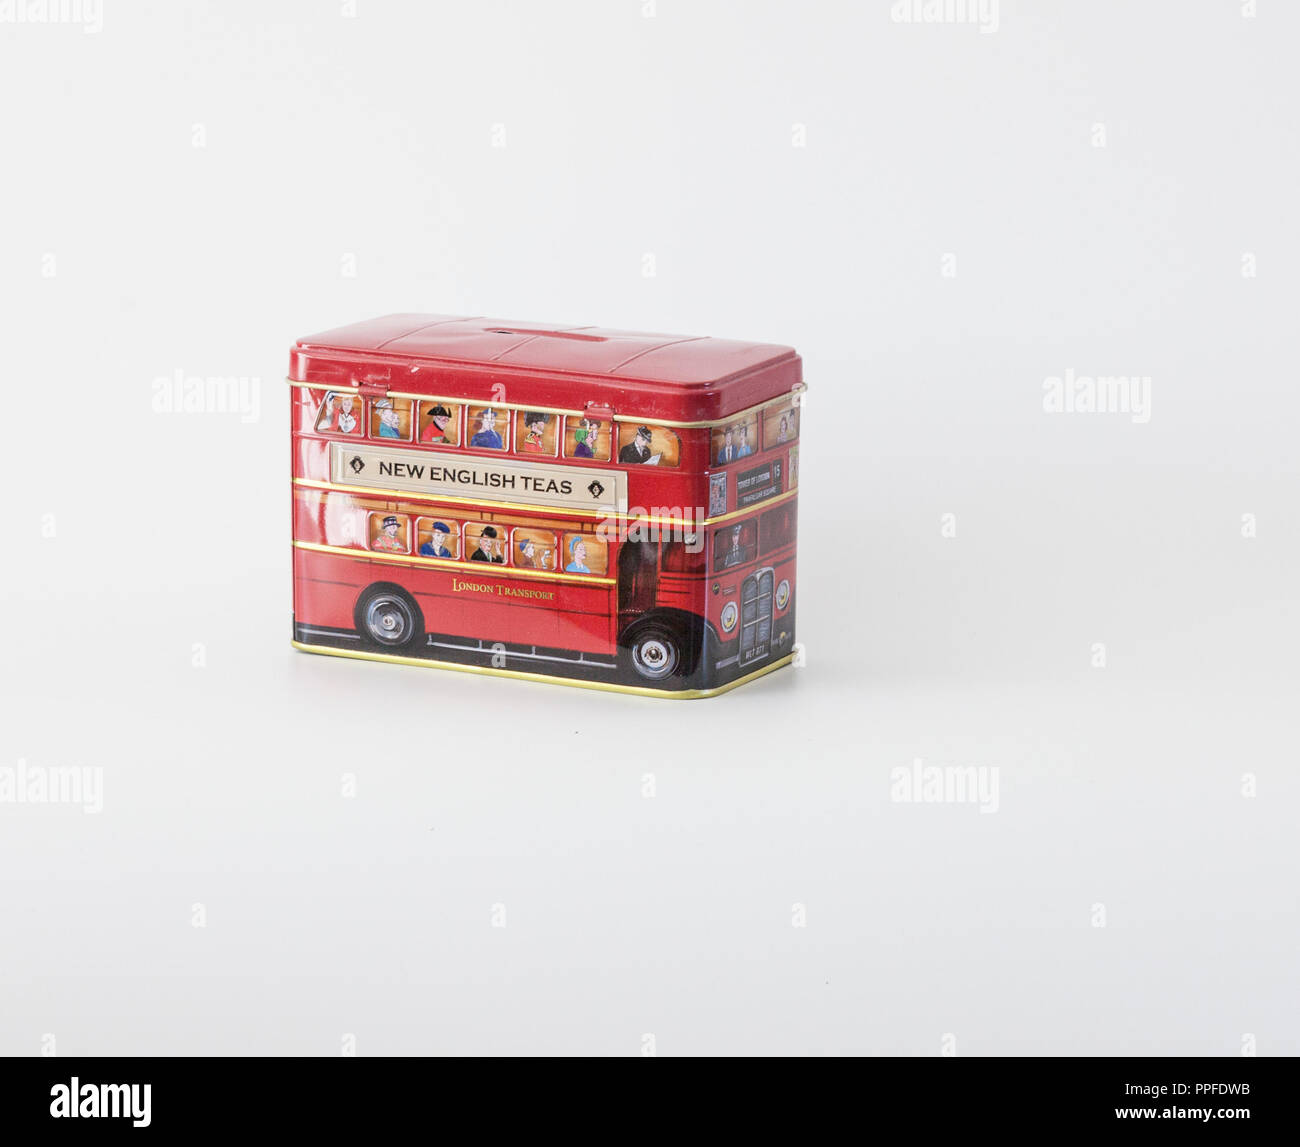 A red London bus money box Stock Photo